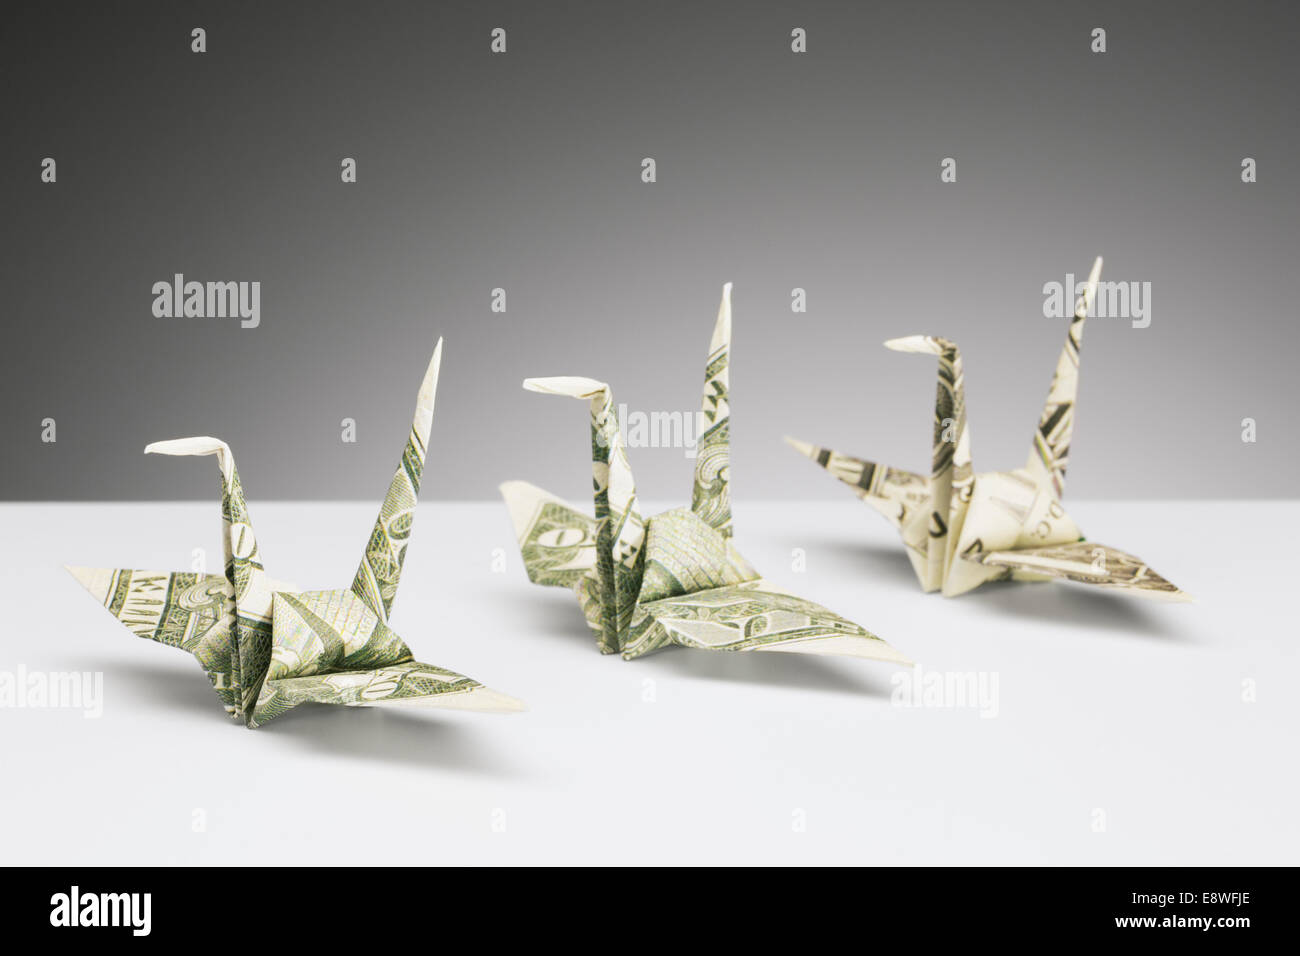 Origami cranes made of dollar bills on counter Stock Photo